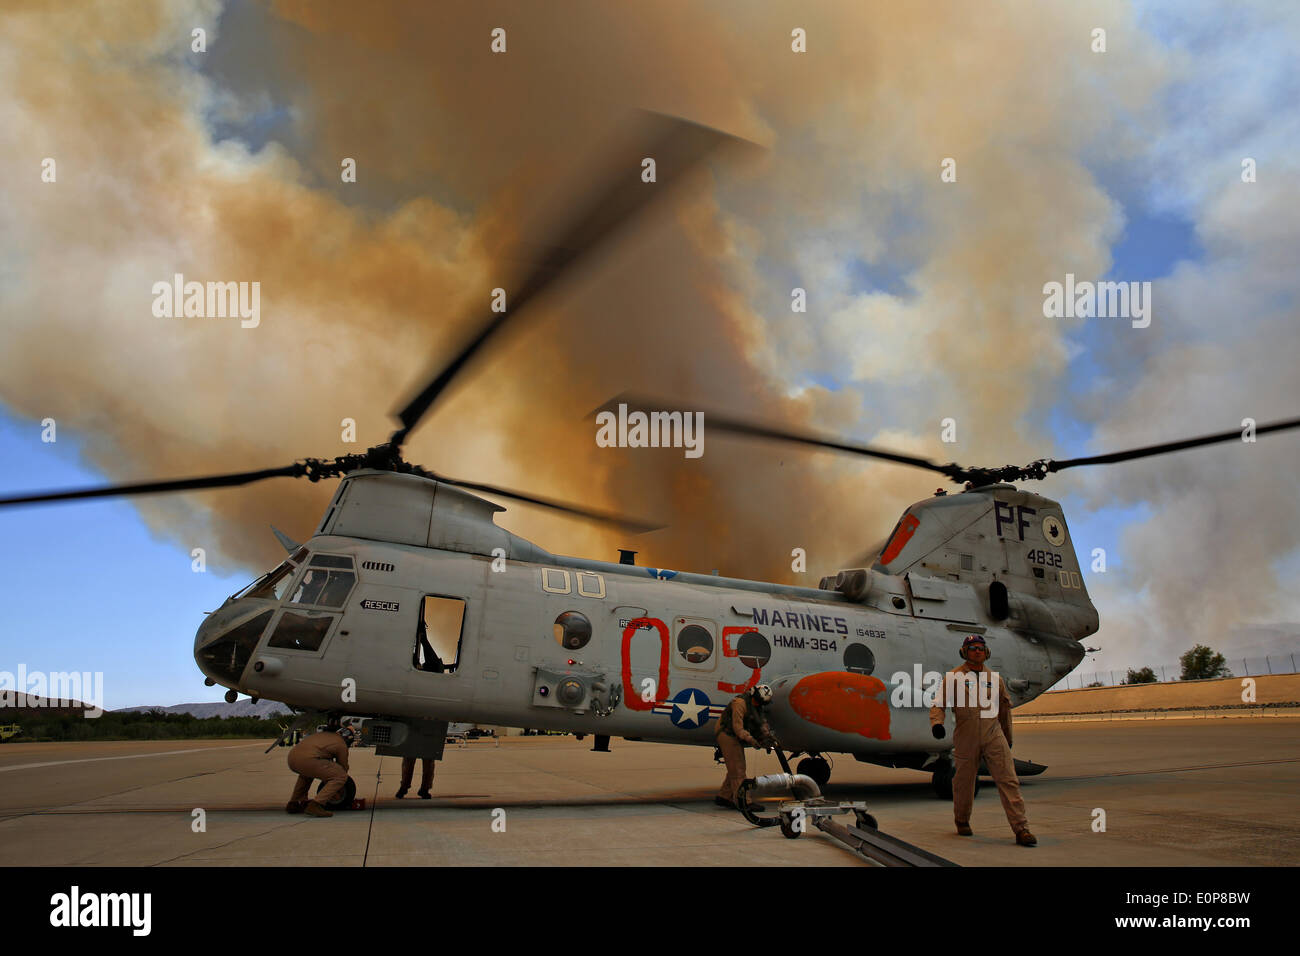 US Marines prepare a CH-46 Sea Knight helicopter to assist in firefighting as the Tomahawk wildfire continues to burn May 16, 2014 around Camp Pendleton, California.  Evacuations forced more than 13,000 people from their homes as the fire burned across San Diego County. Stock Photo